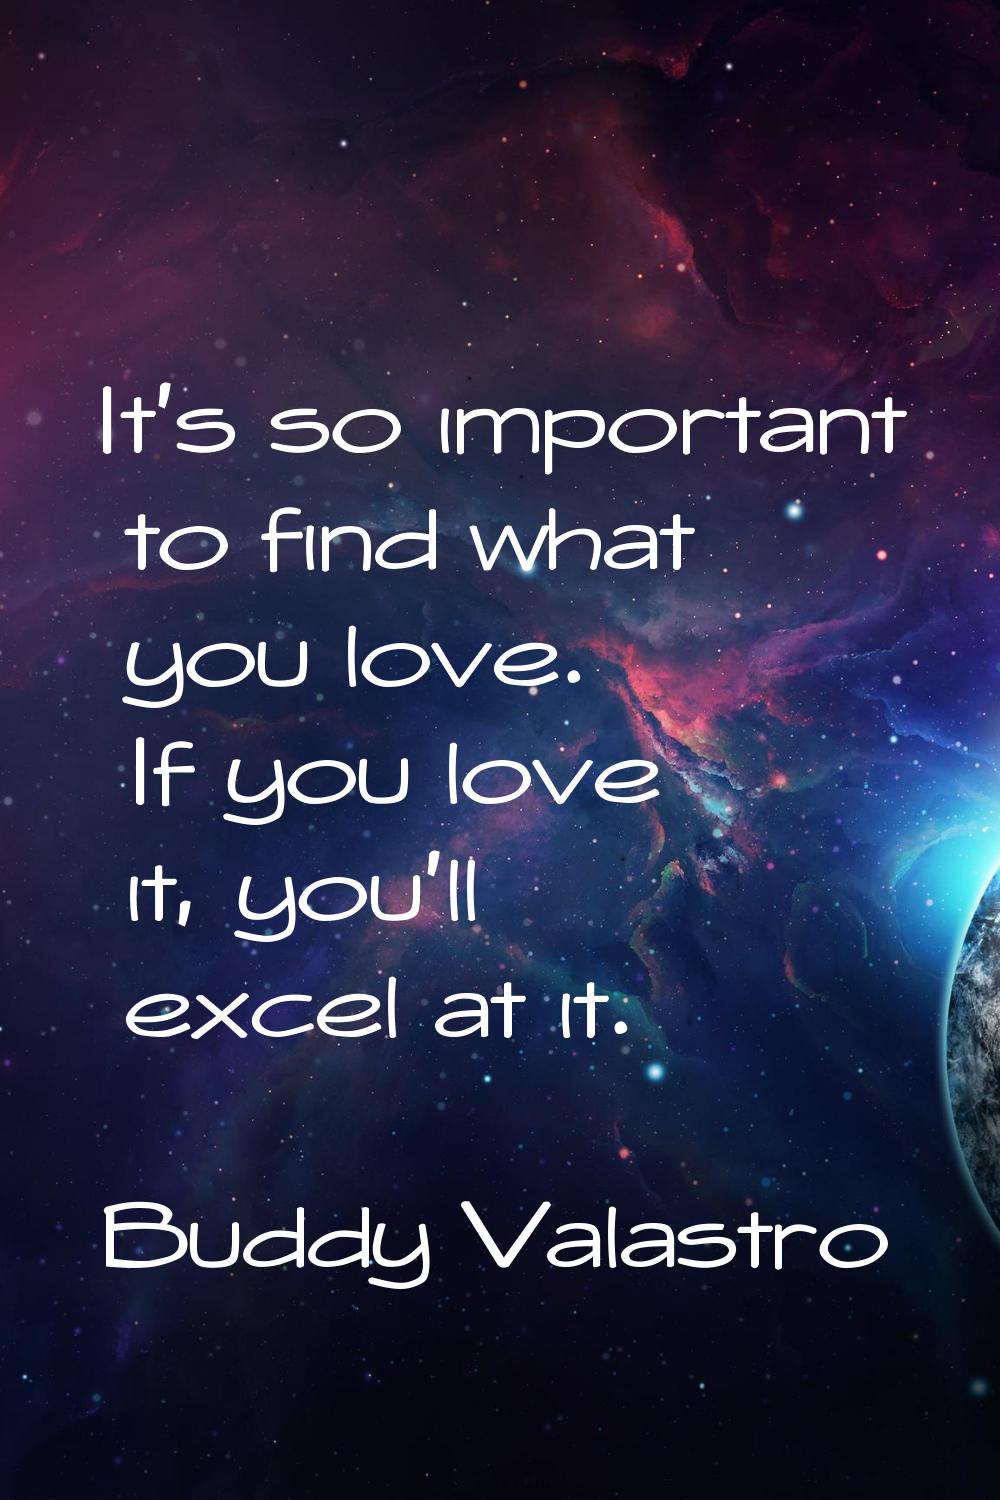 It's so important to find what you love. If you love it, you'll excel at it.